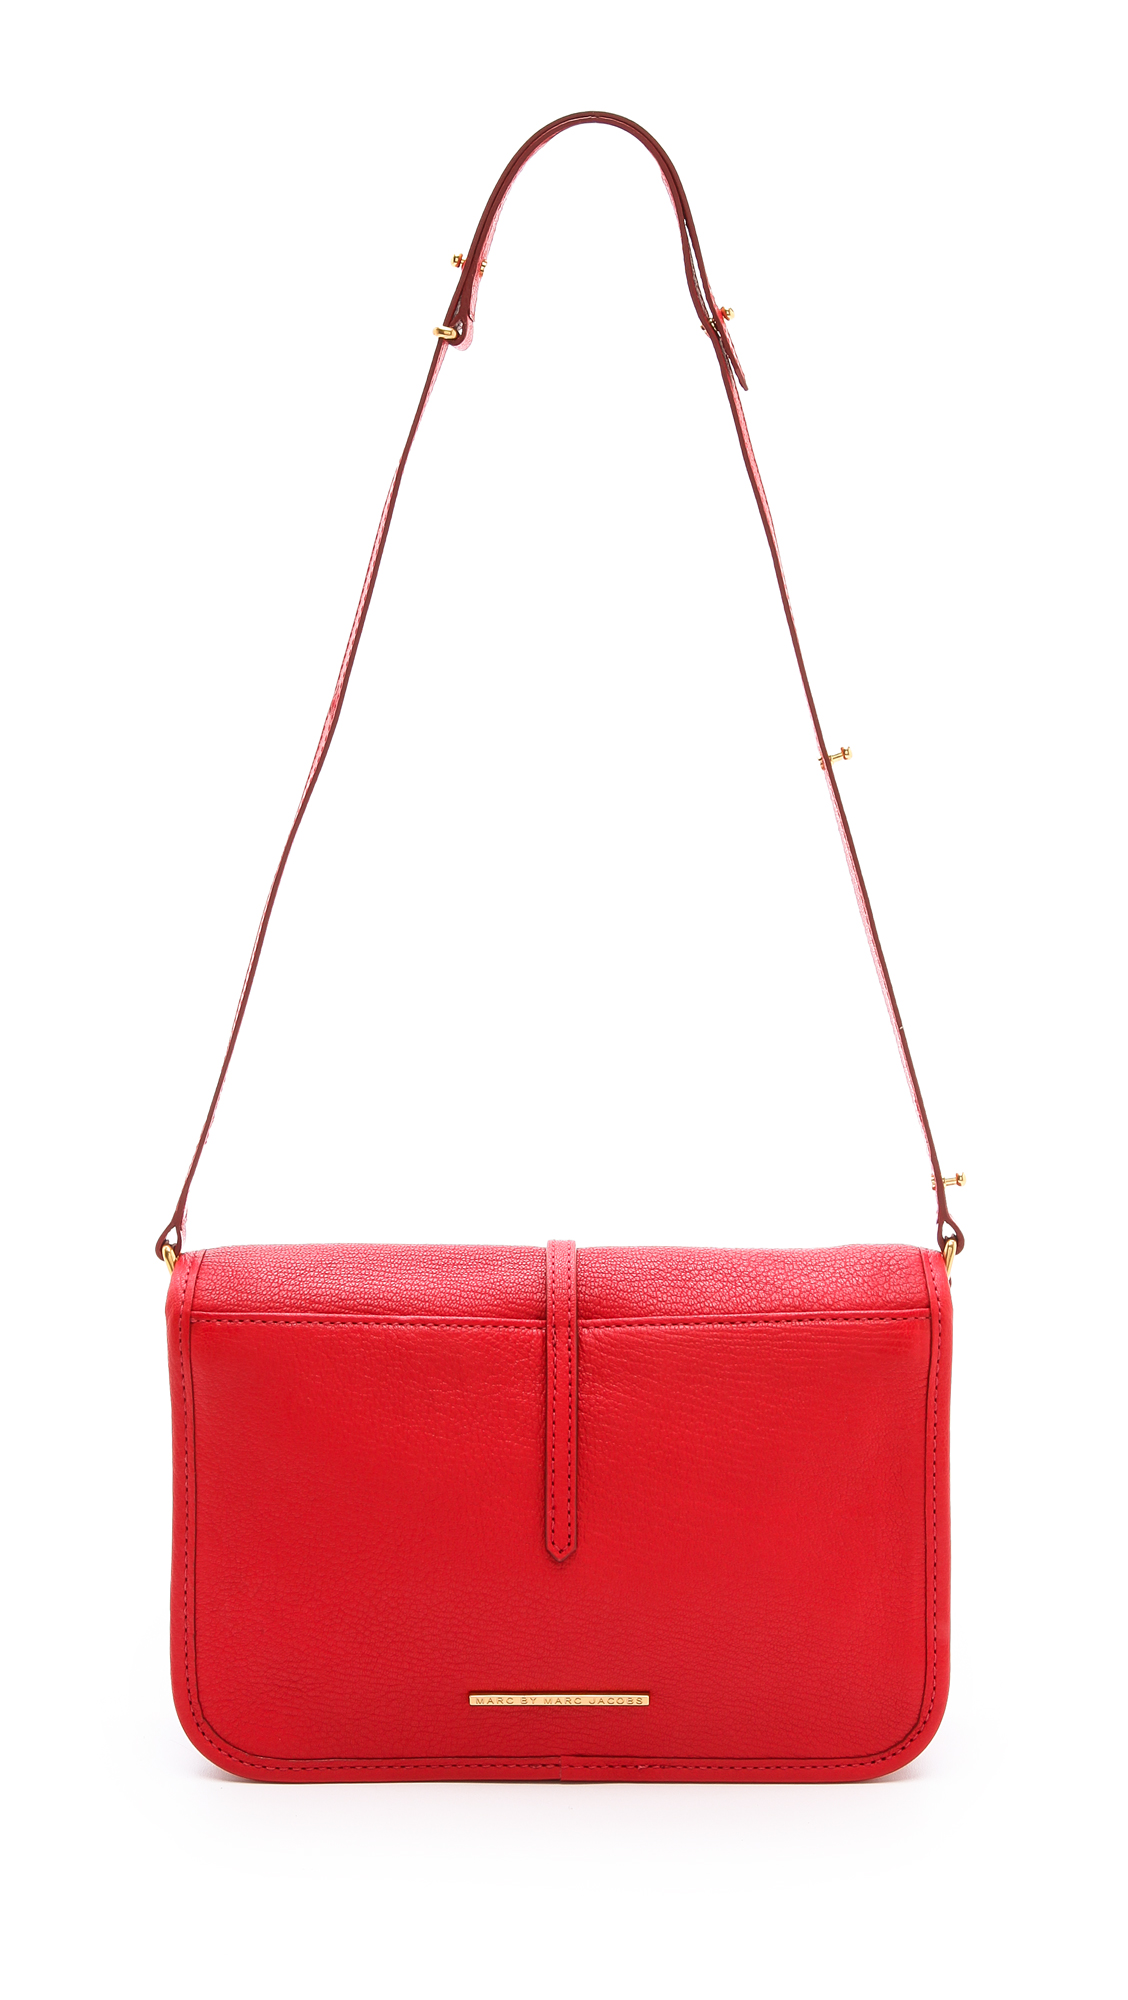 Lyst - Marc By Marc Jacobs Uptown Lila Bag in Red